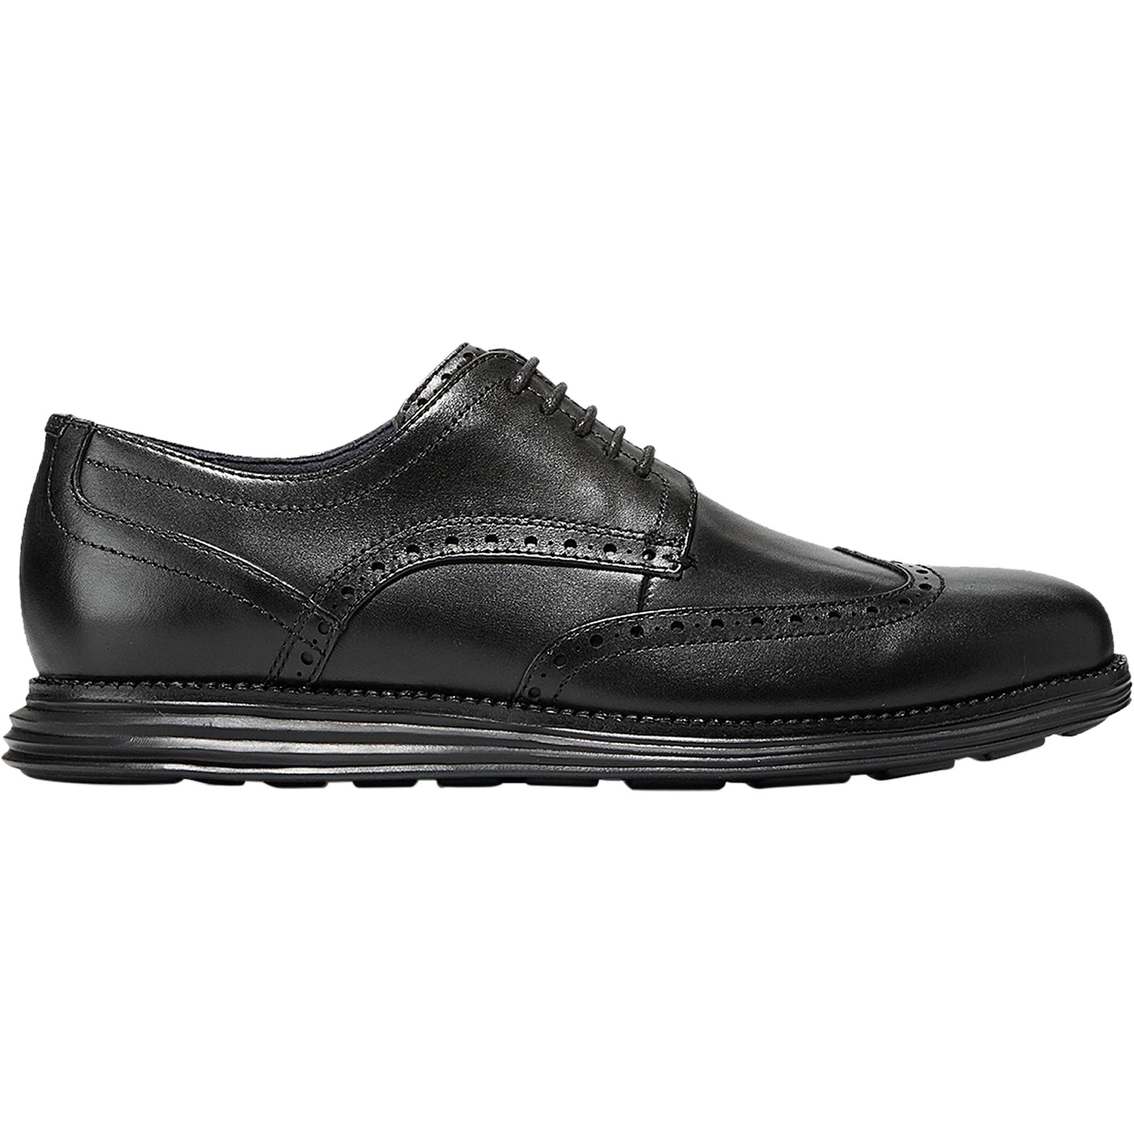 Cole Haan Original Grand Wingtip Oxford Shoes - Image 2 of 5